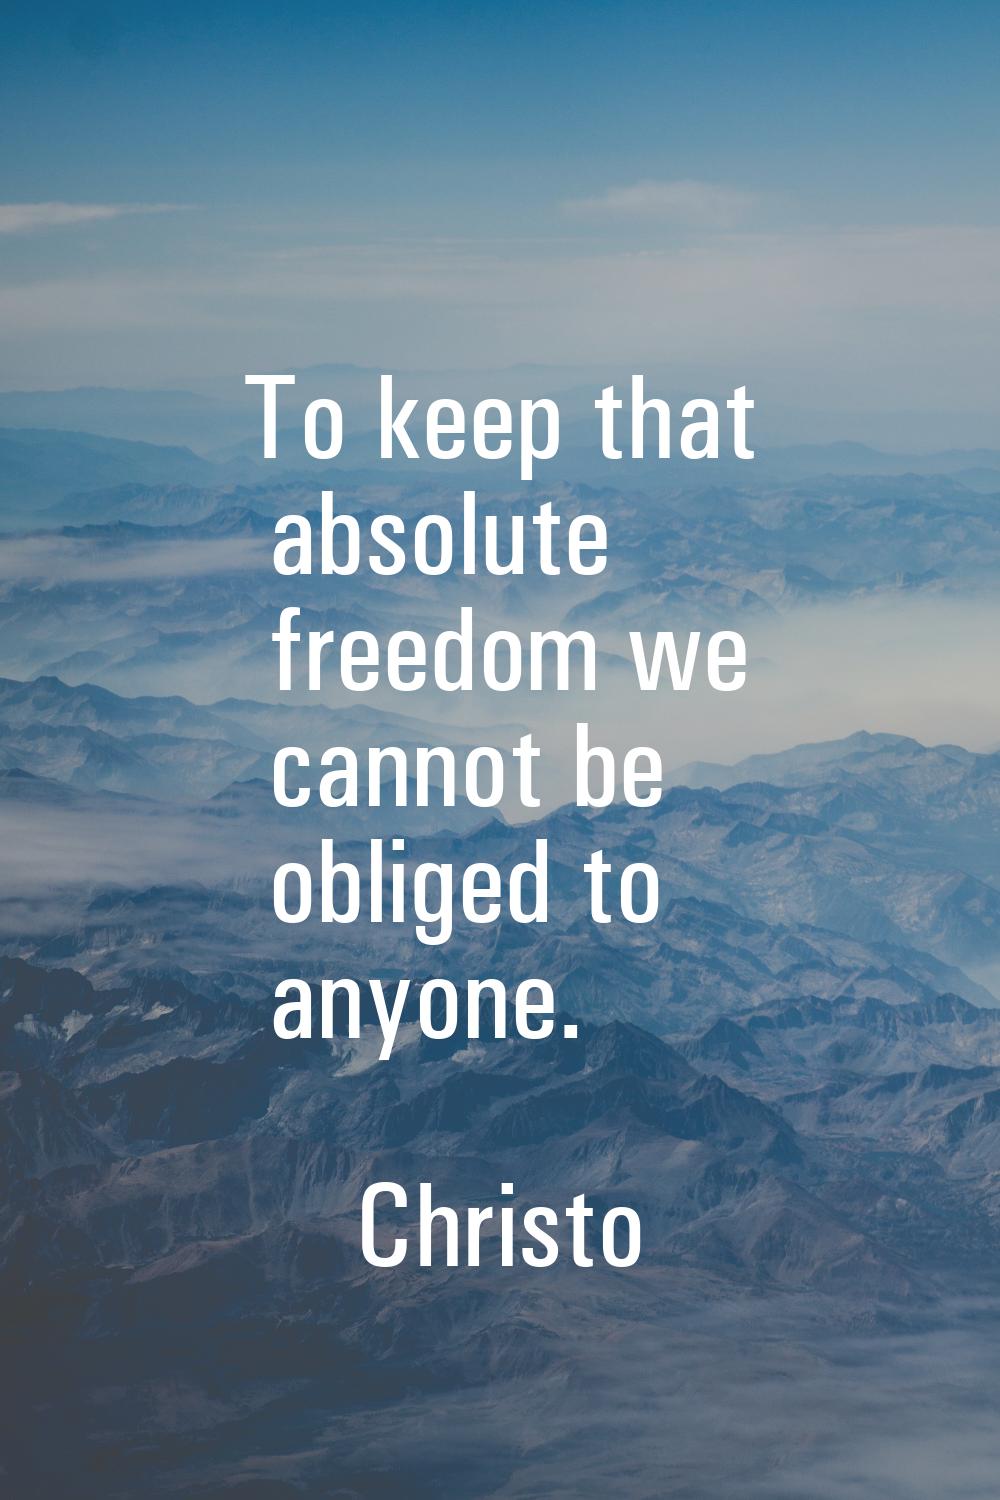 To keep that absolute freedom we cannot be obliged to anyone.